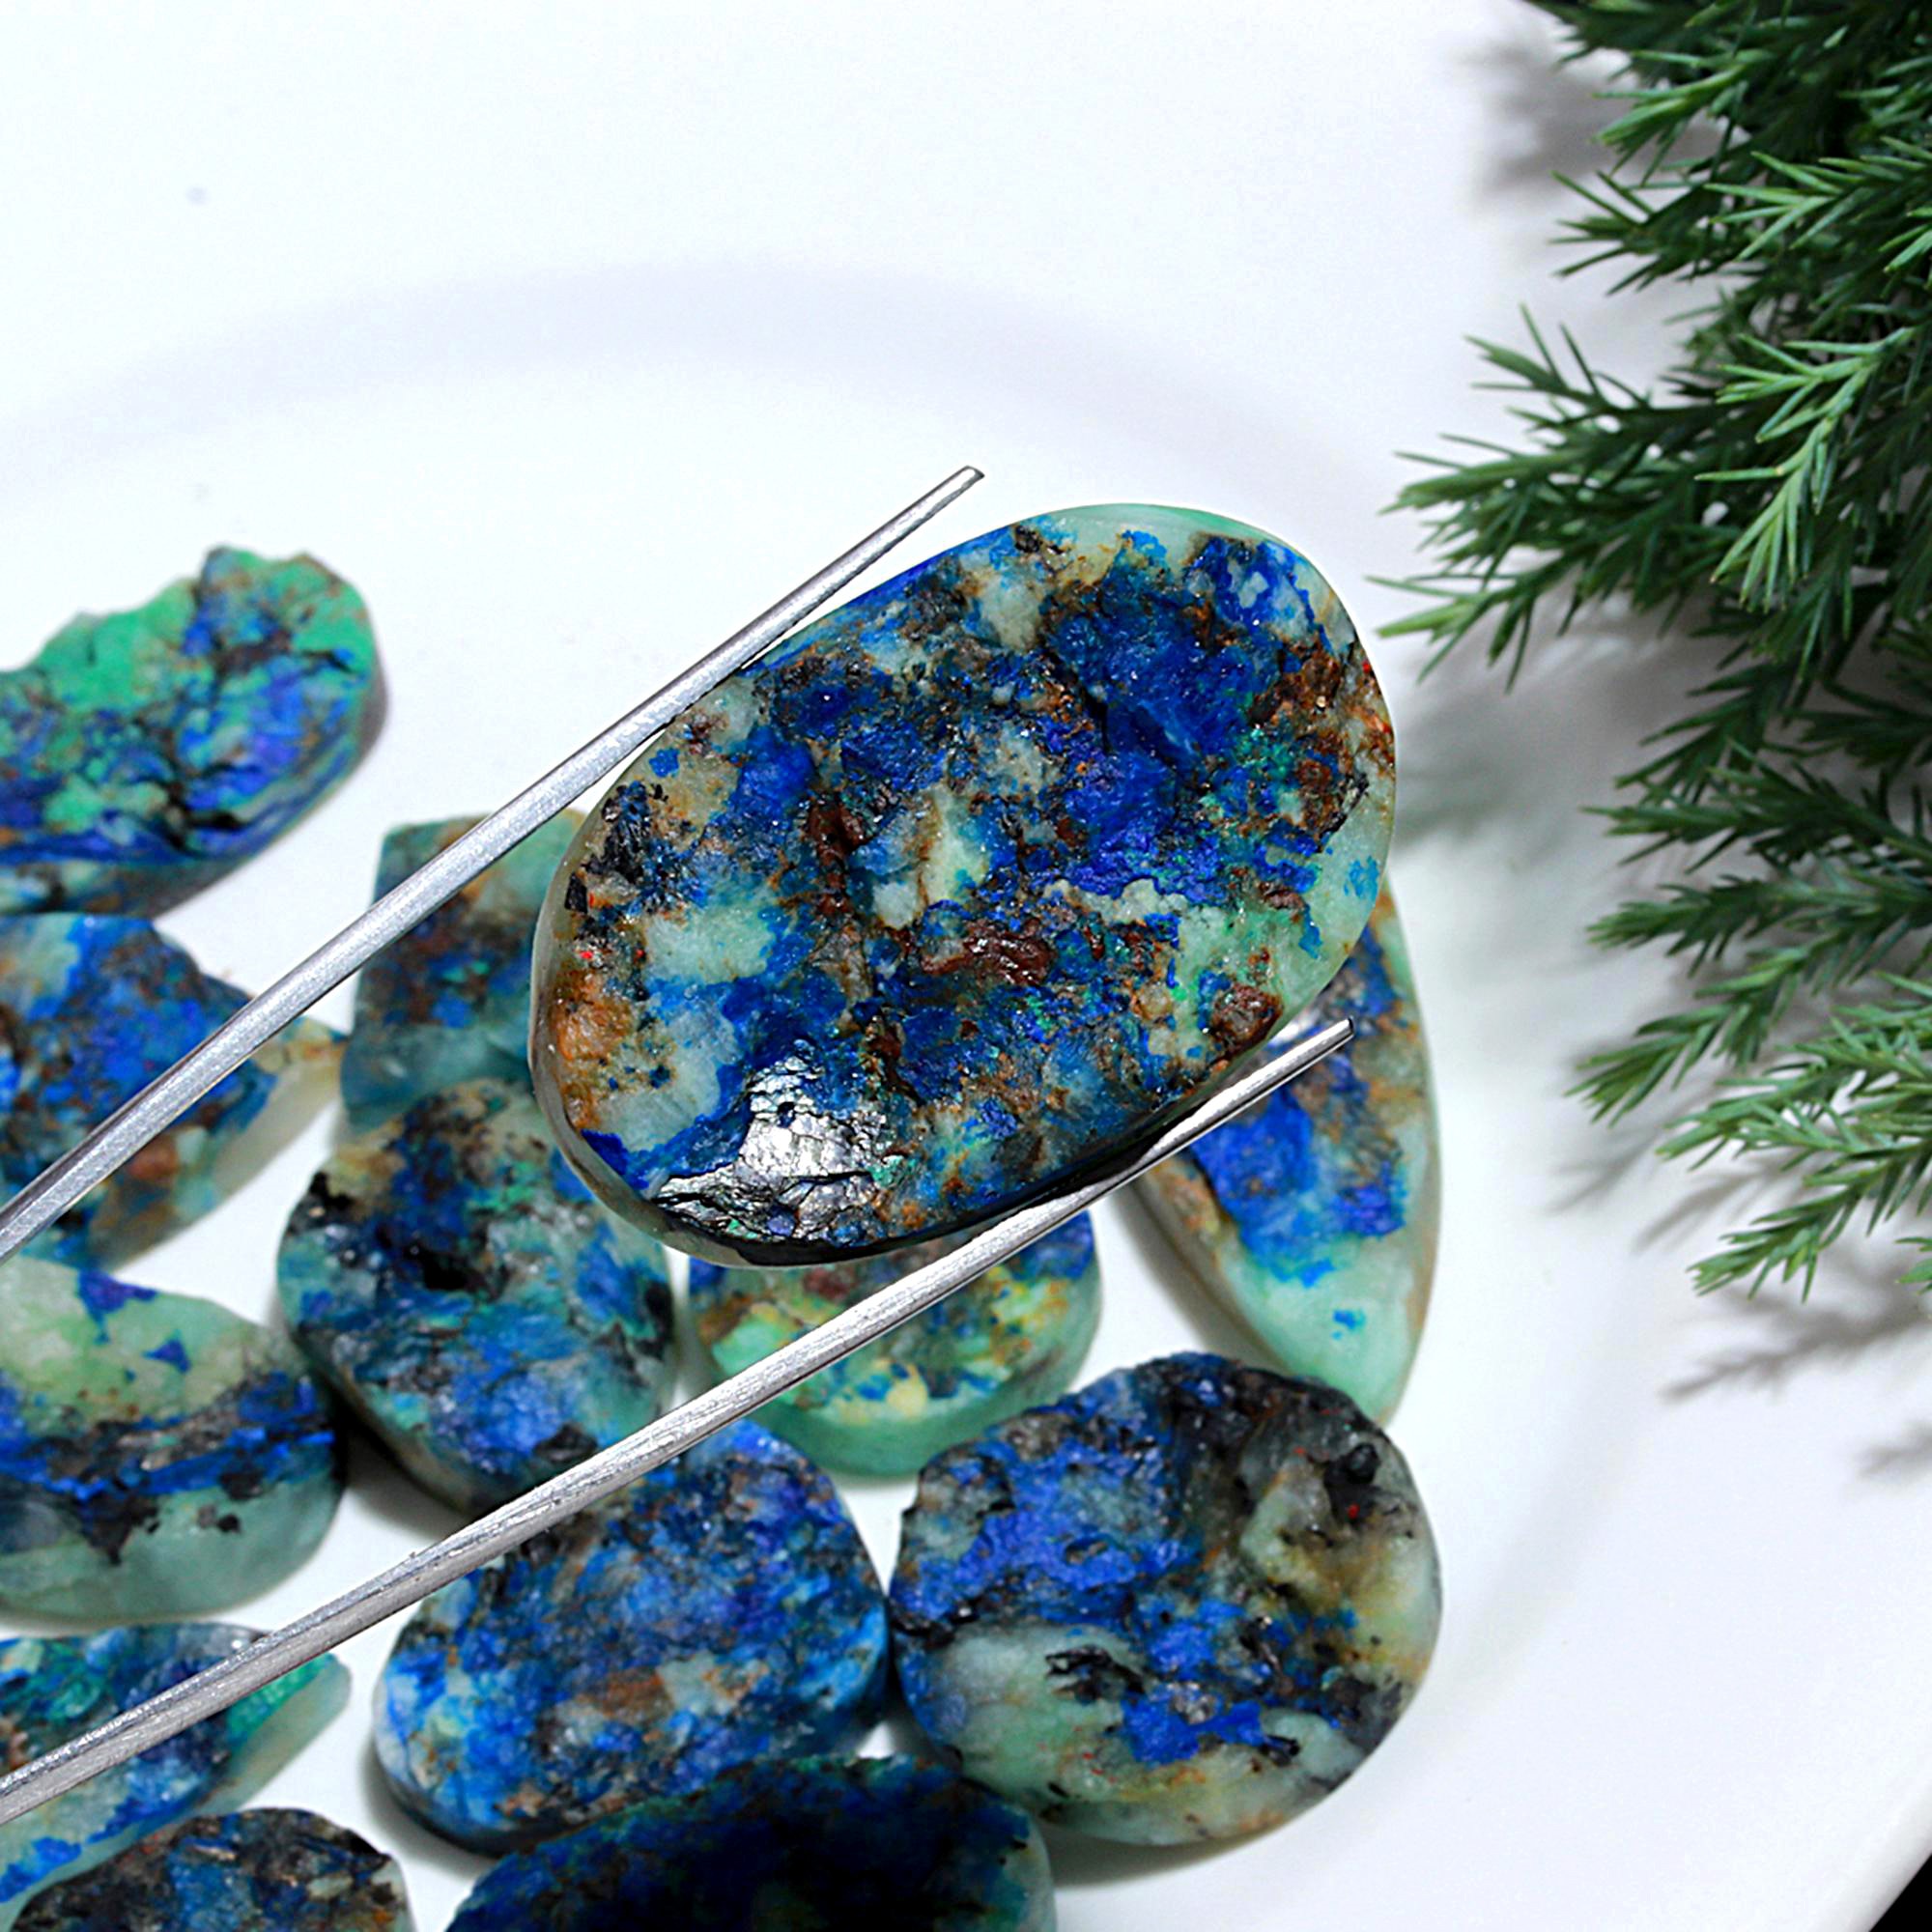 15 Pcs 618.Cts Natural Azurite Druzy Unpolished Loose Cabochon Gemstone For Jewelry Wholesale Lot Size 48x18 22x23mm